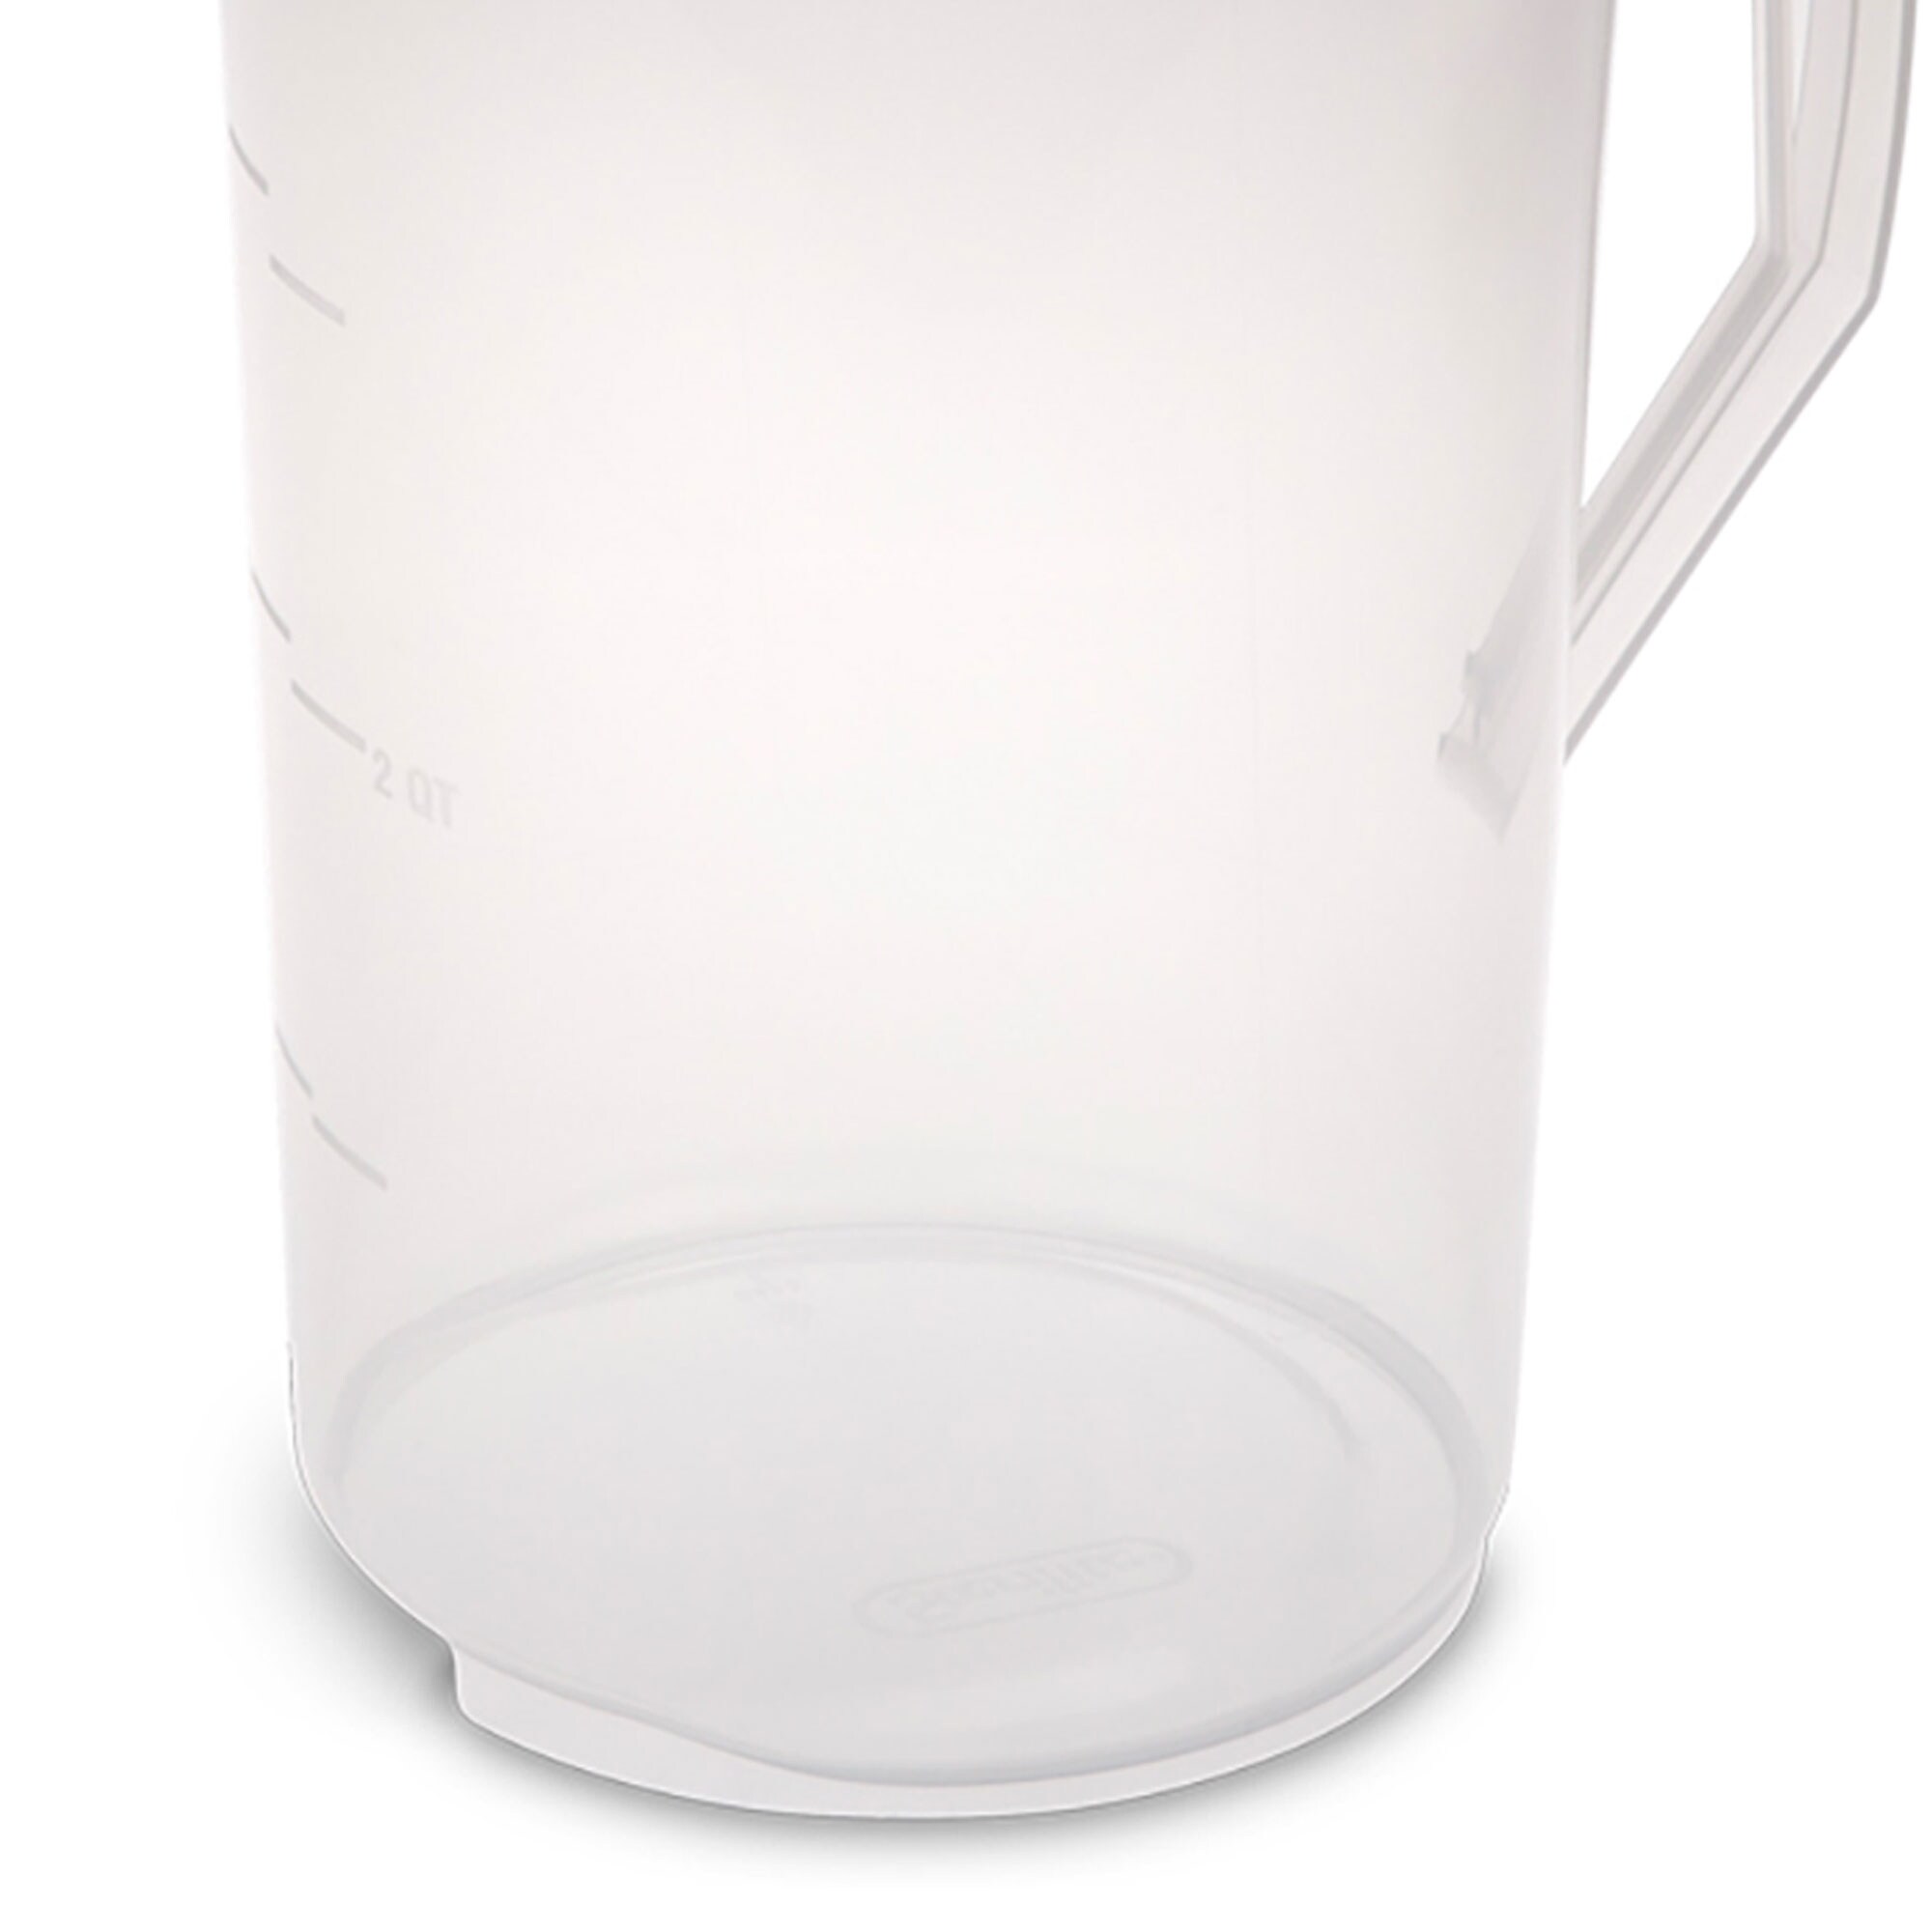 https://ak1.ostkcdn.com/images/products/is/images/direct/b23300a0247840bdbea53878ea2a56dac0369fca/Sterilite-1-Gallon-Round-Plastic-Pitcher-and-Spout%2C-Clear-w--Color-Lid-%2818-Pack%29.jpg